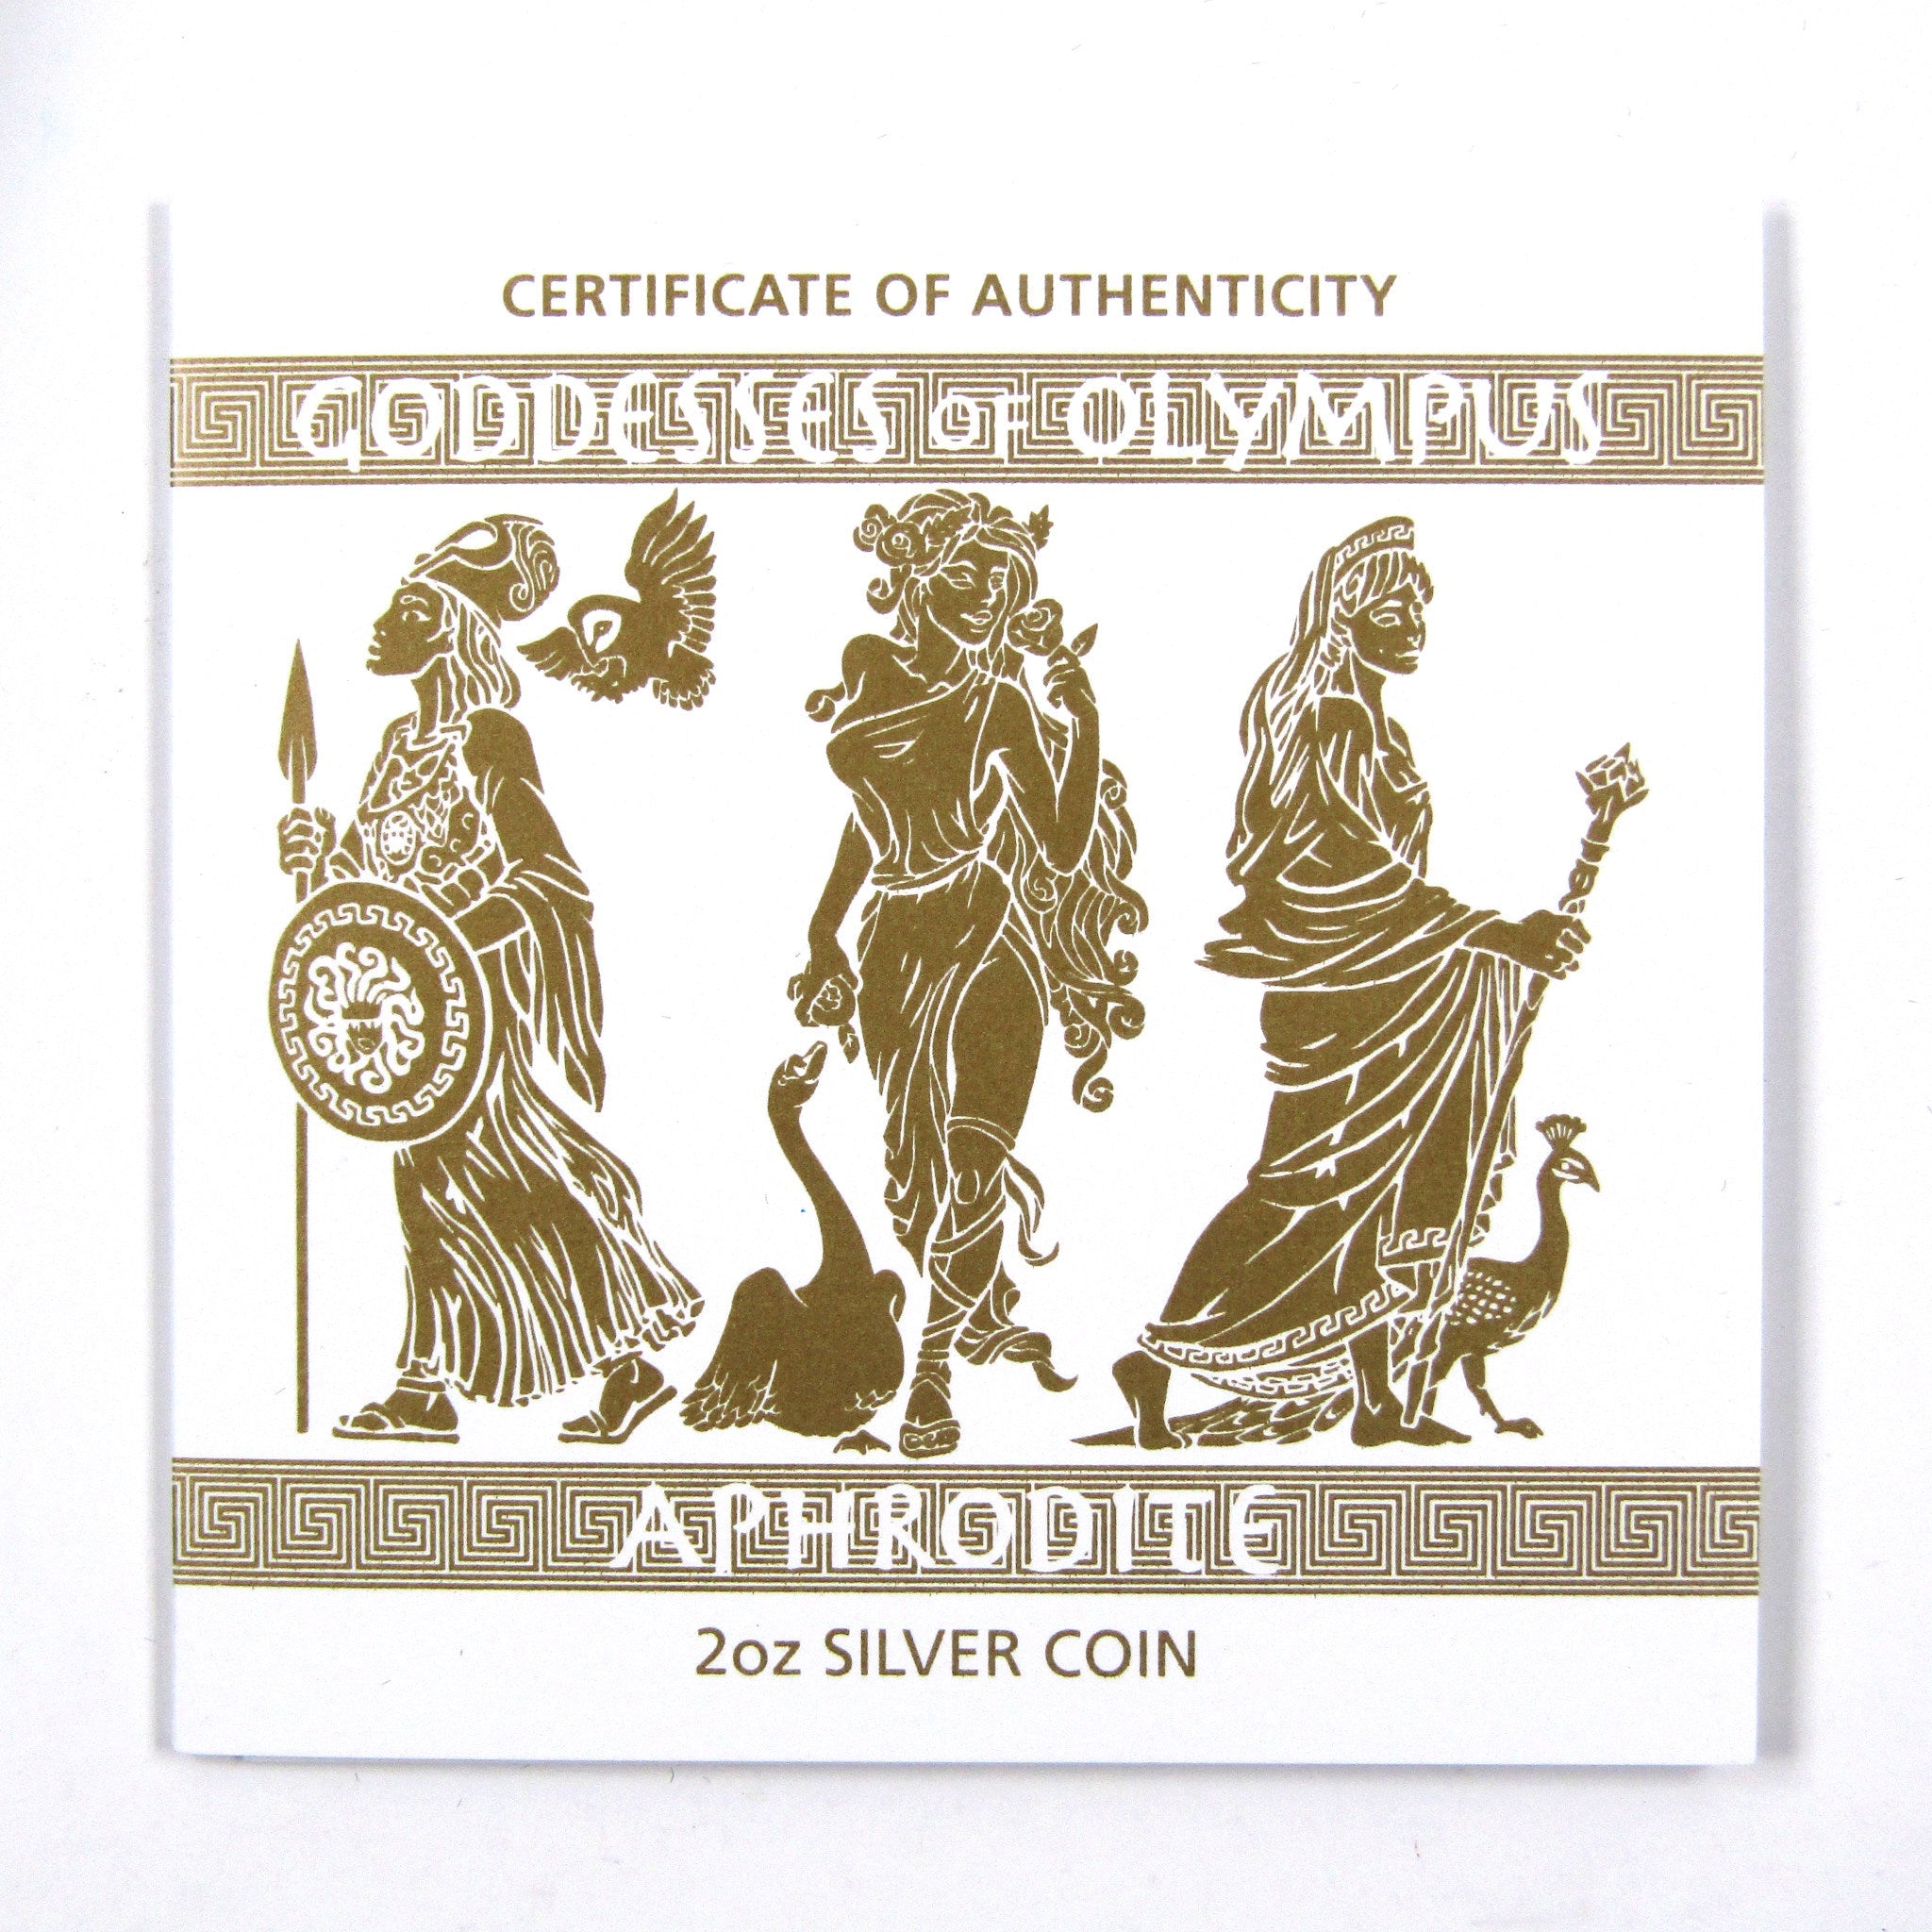 2015 Goddesses Of Olympus Aphrodite Silver High Relief SKU:CPC1995